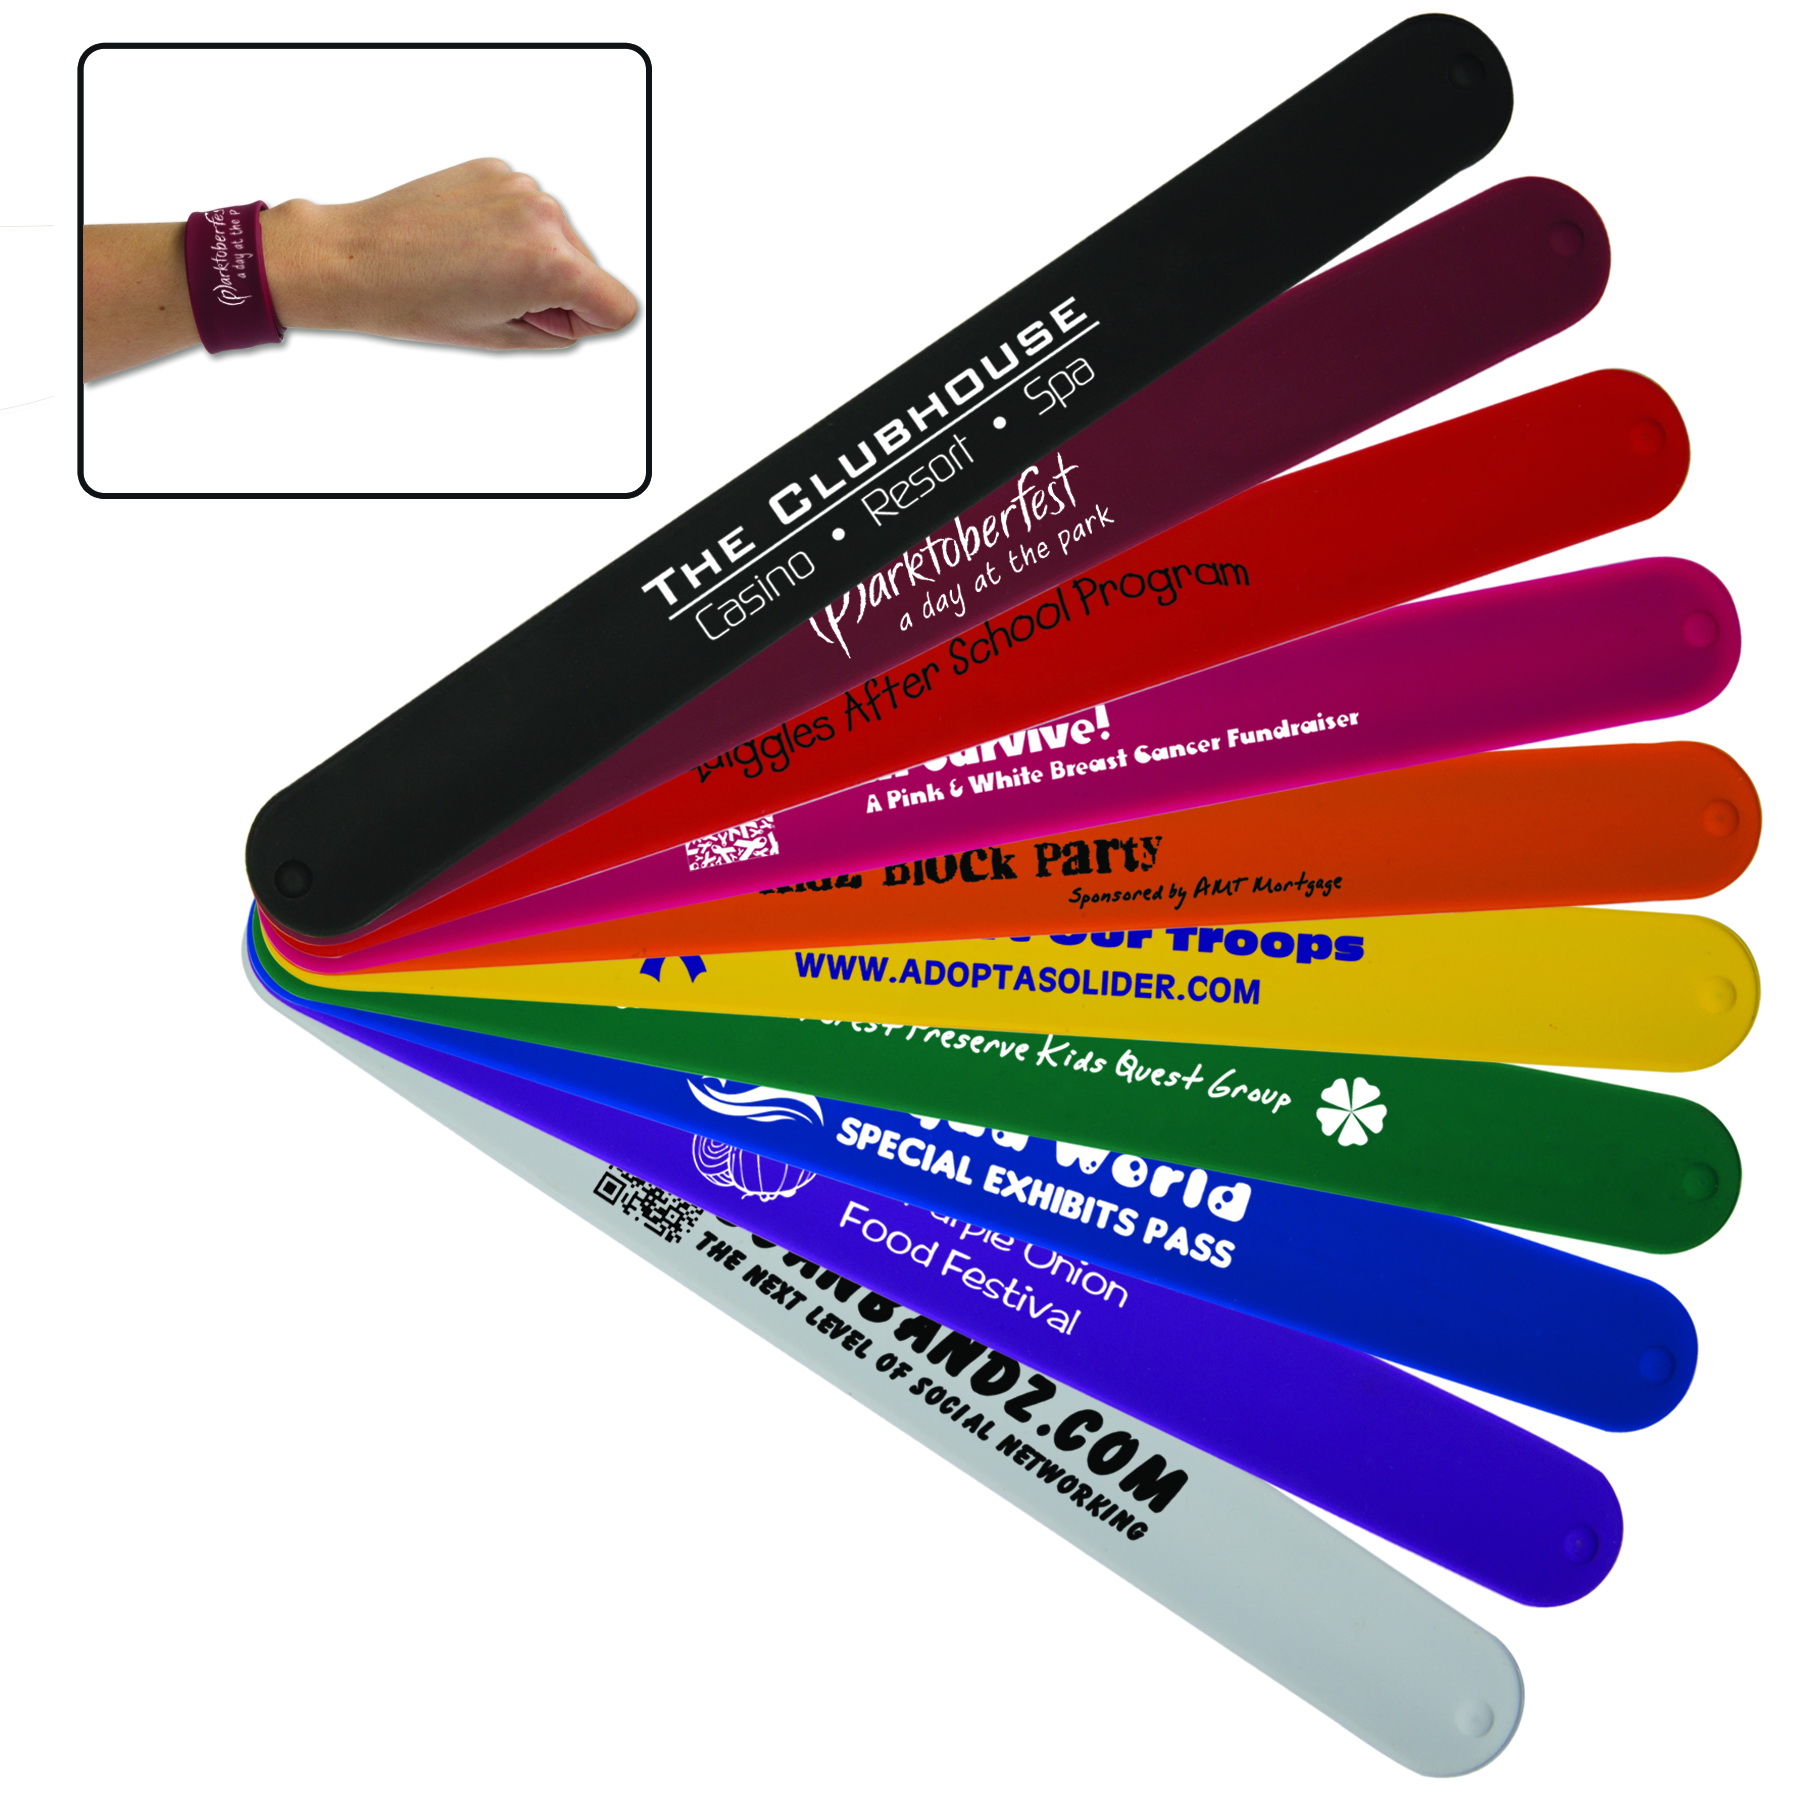 Cool Slap Bracelet - Promotional Products, Trusted by Big Brands